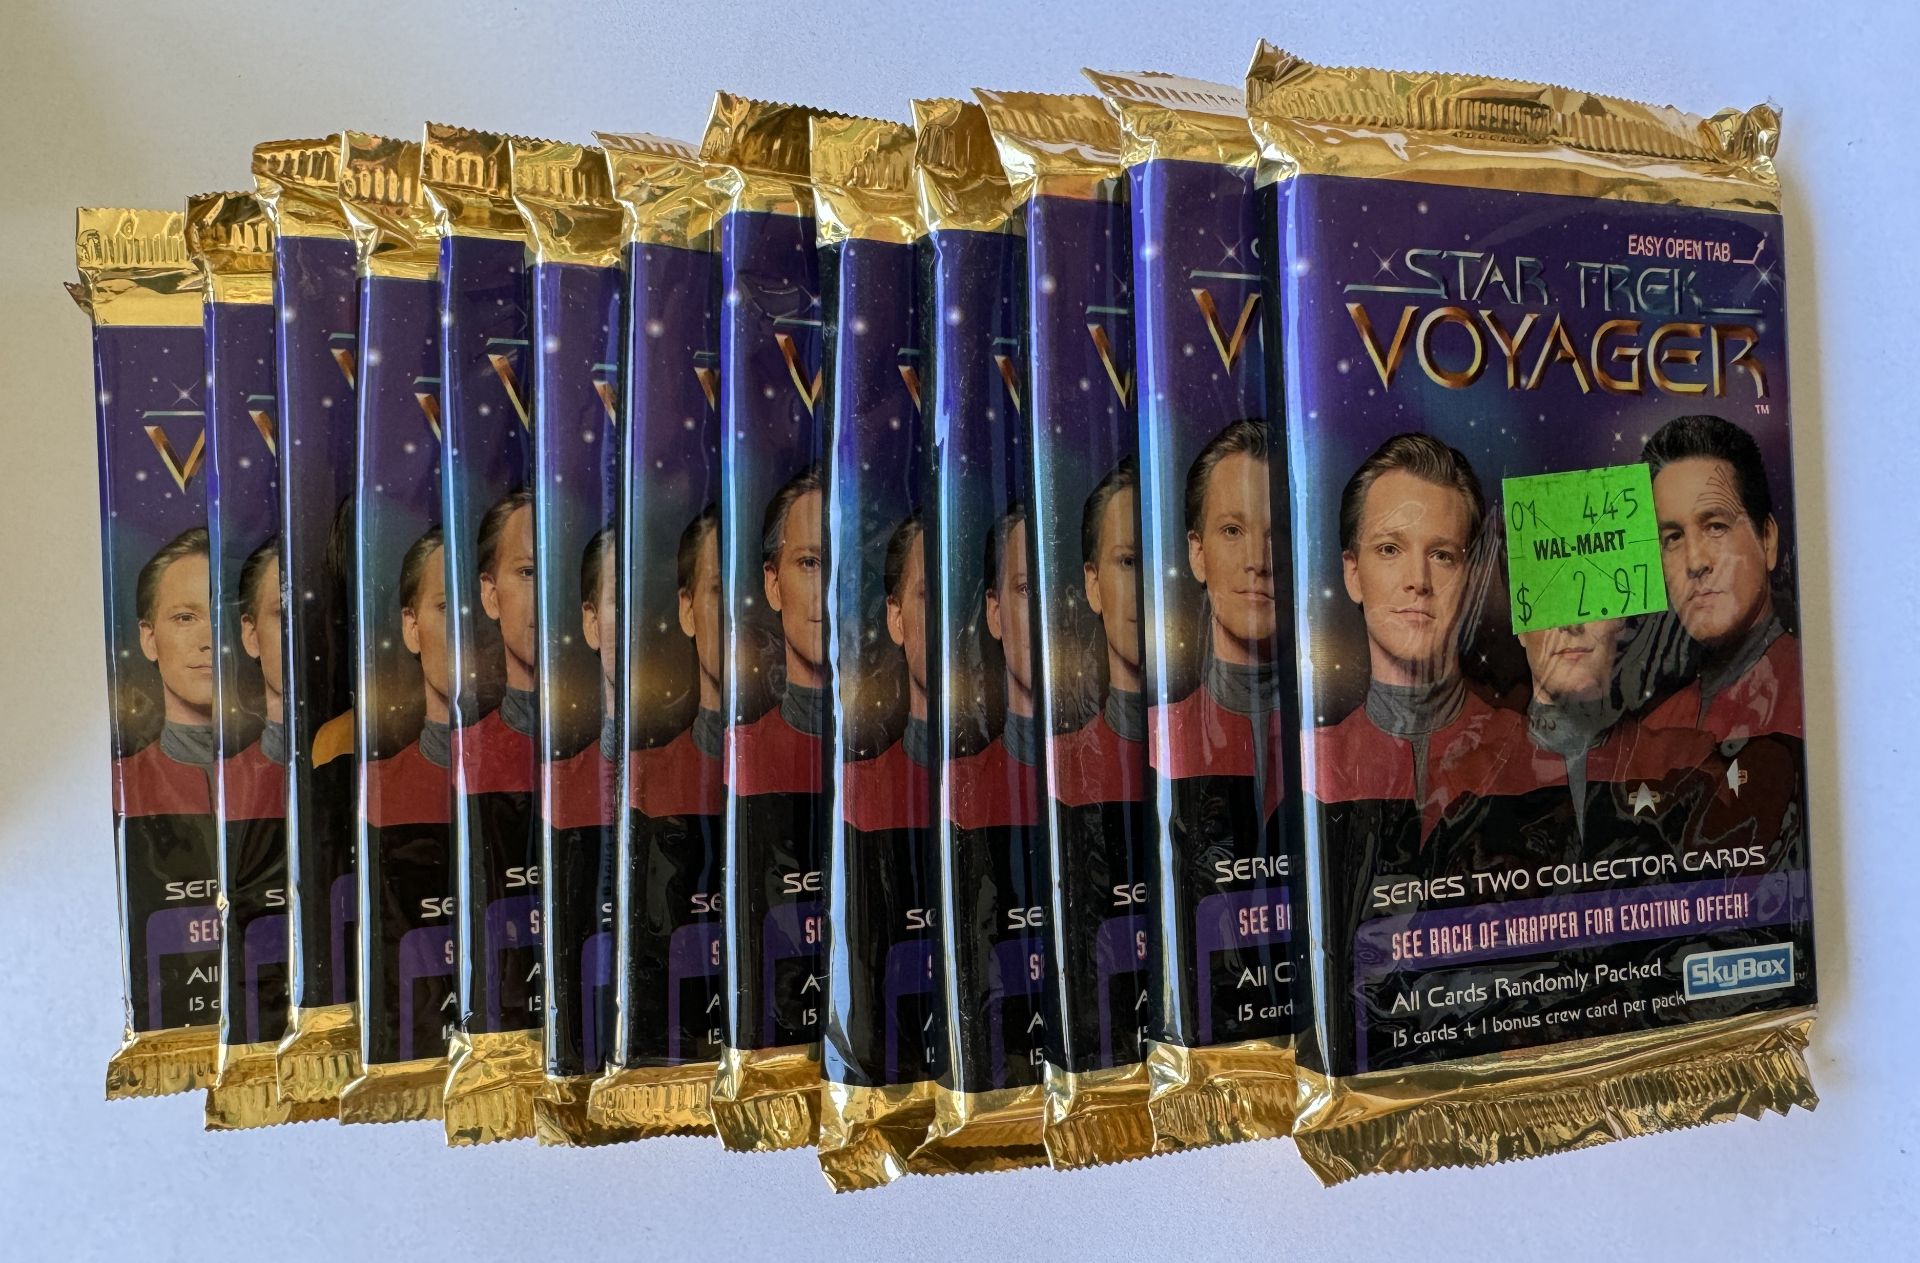 SERIES TWO COLLECTOR CARDS SET - STAR TREK VOYAGER - SKYBOX - Image 2 of 2